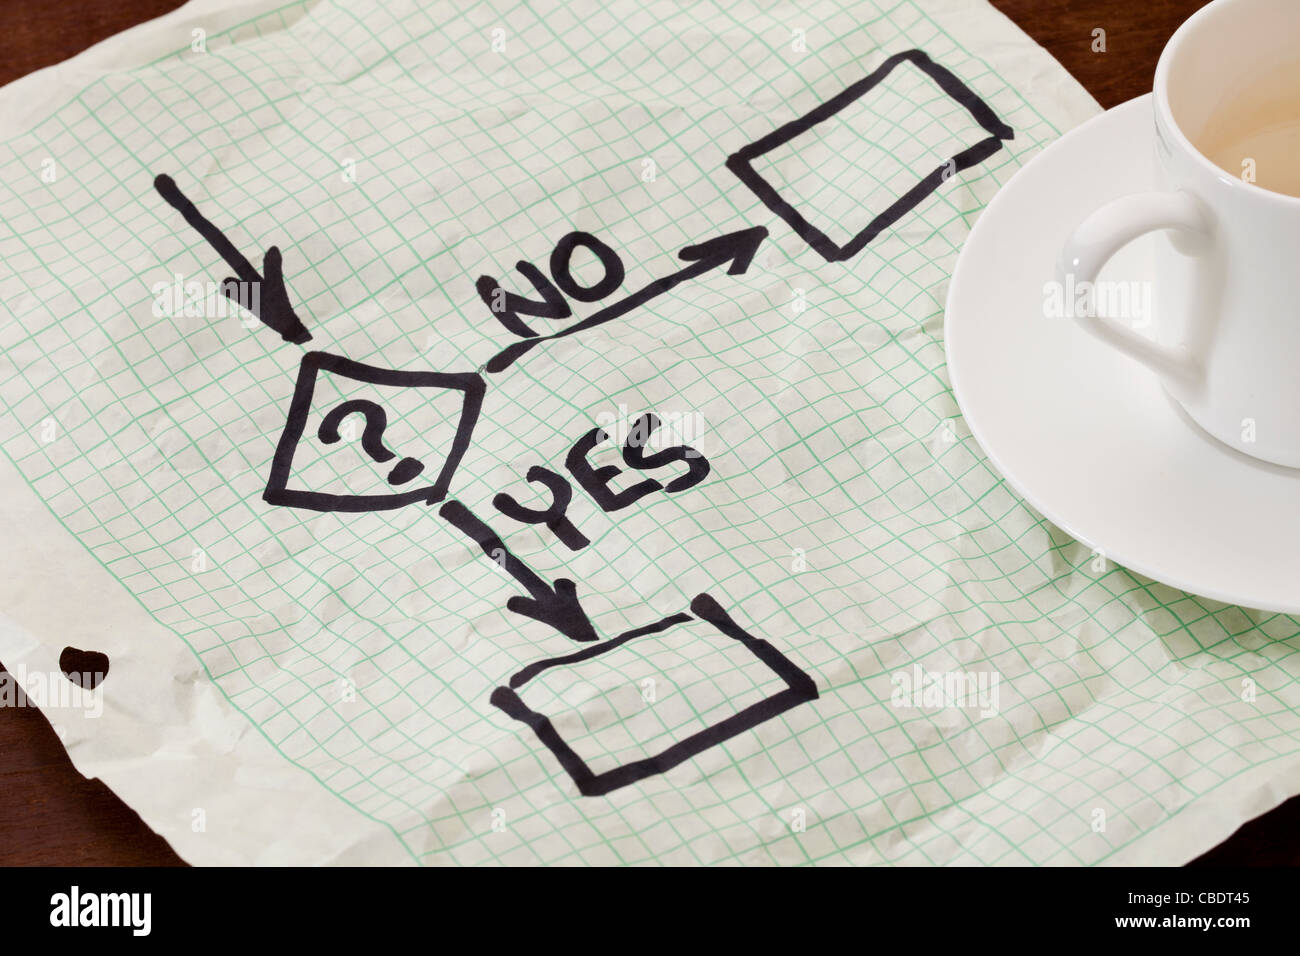 yes or no decision flowchart - black marker sketch on a grid paper with a coffee cup Stock Photo